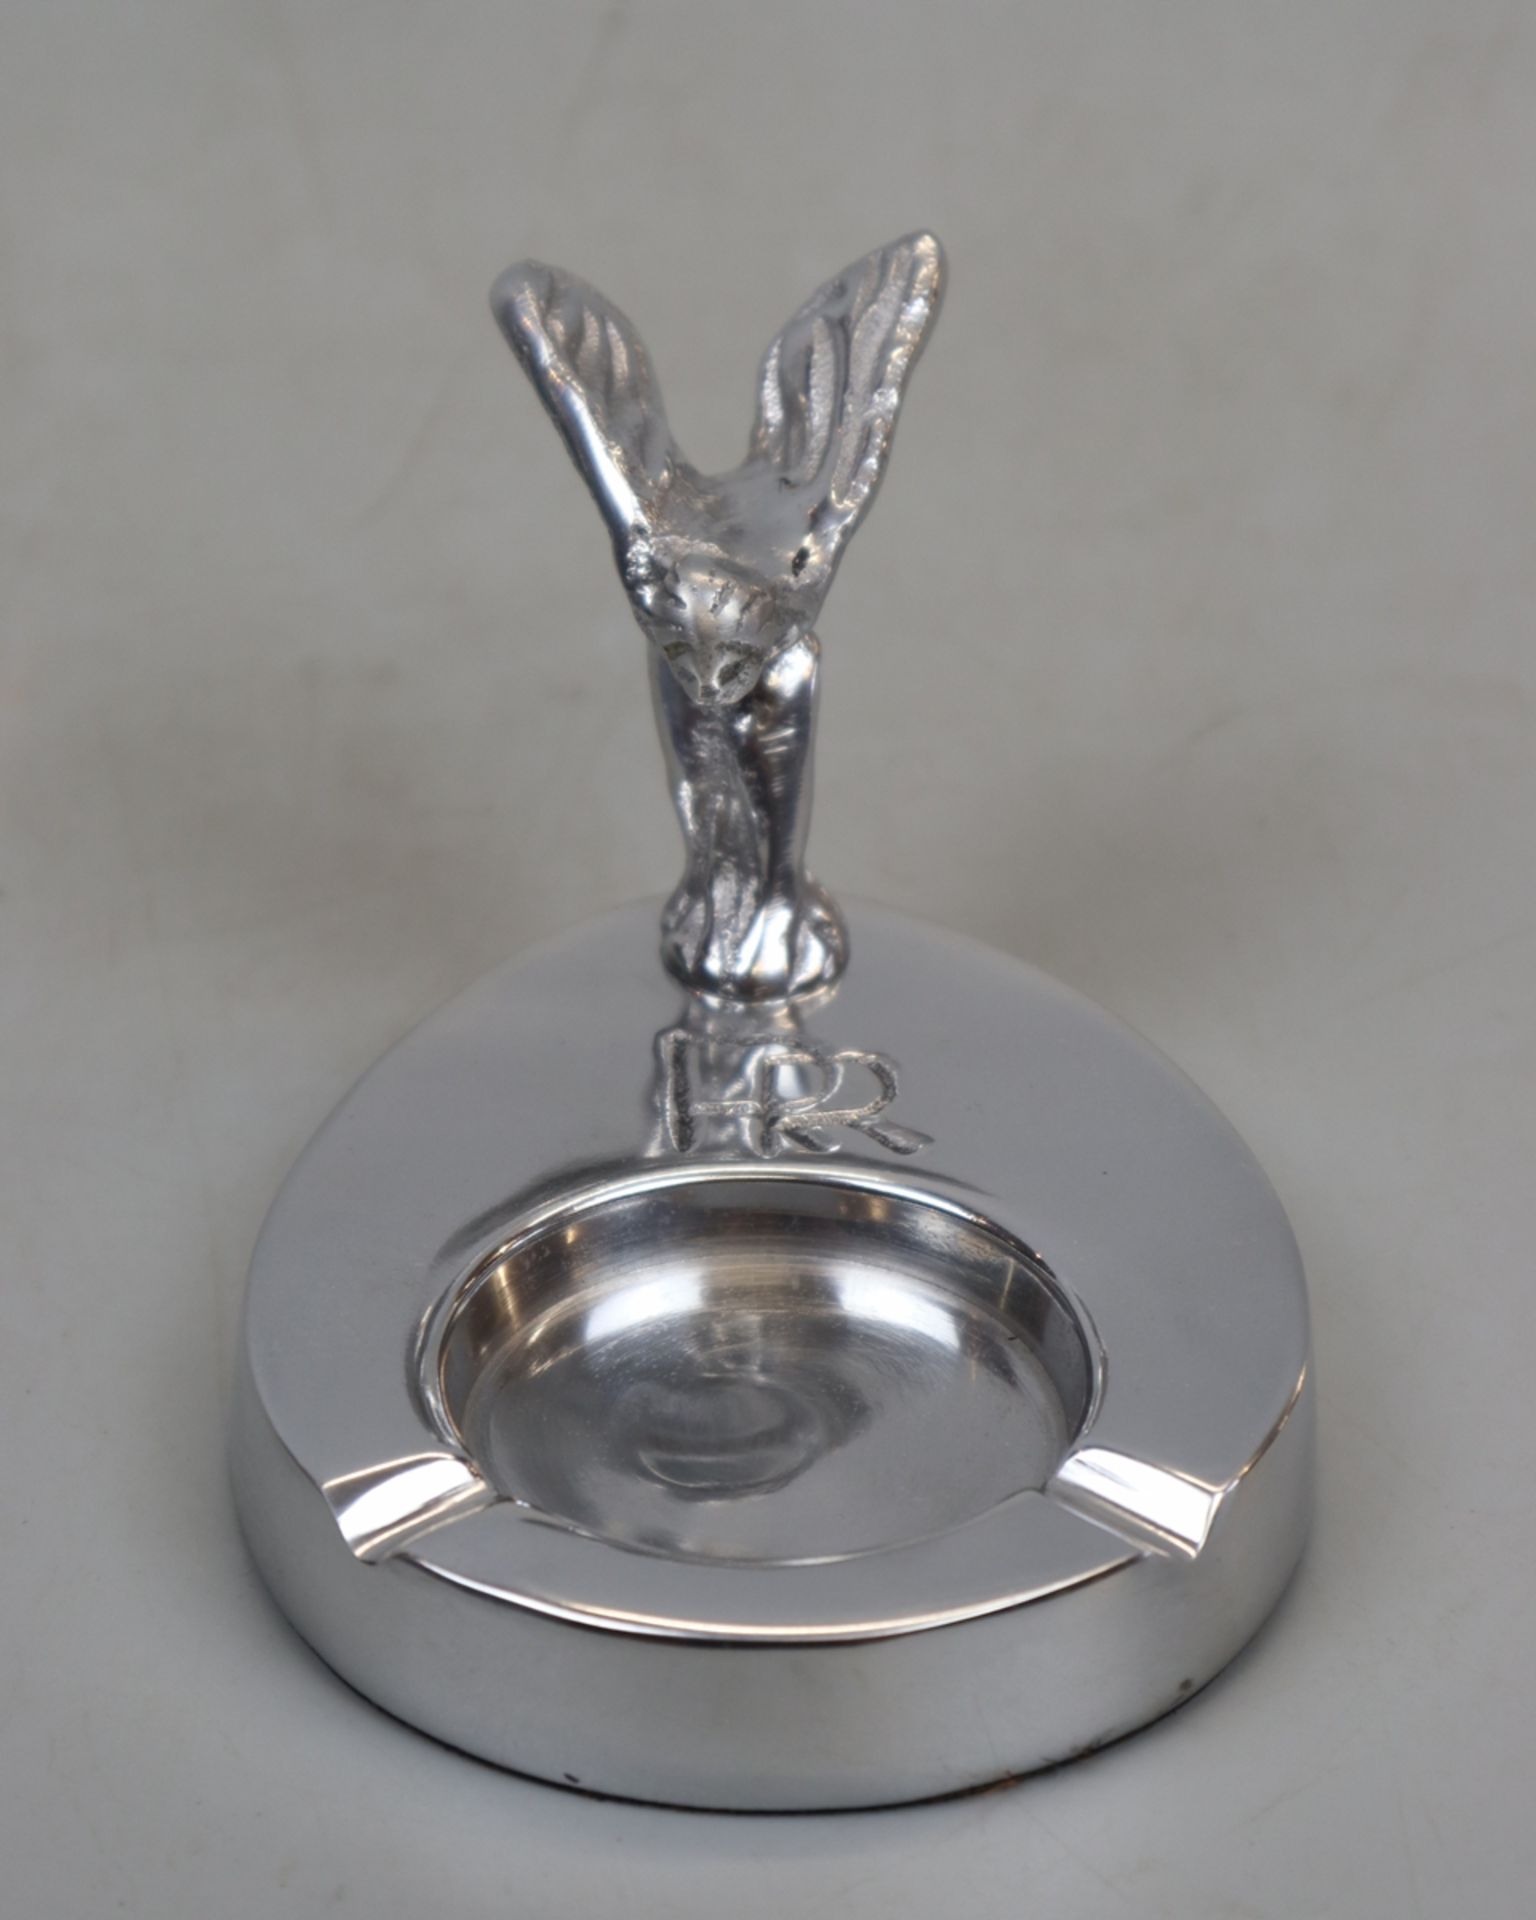 Rolls Royce desk ash tray with Spirit of Ecstasy - Image 2 of 2